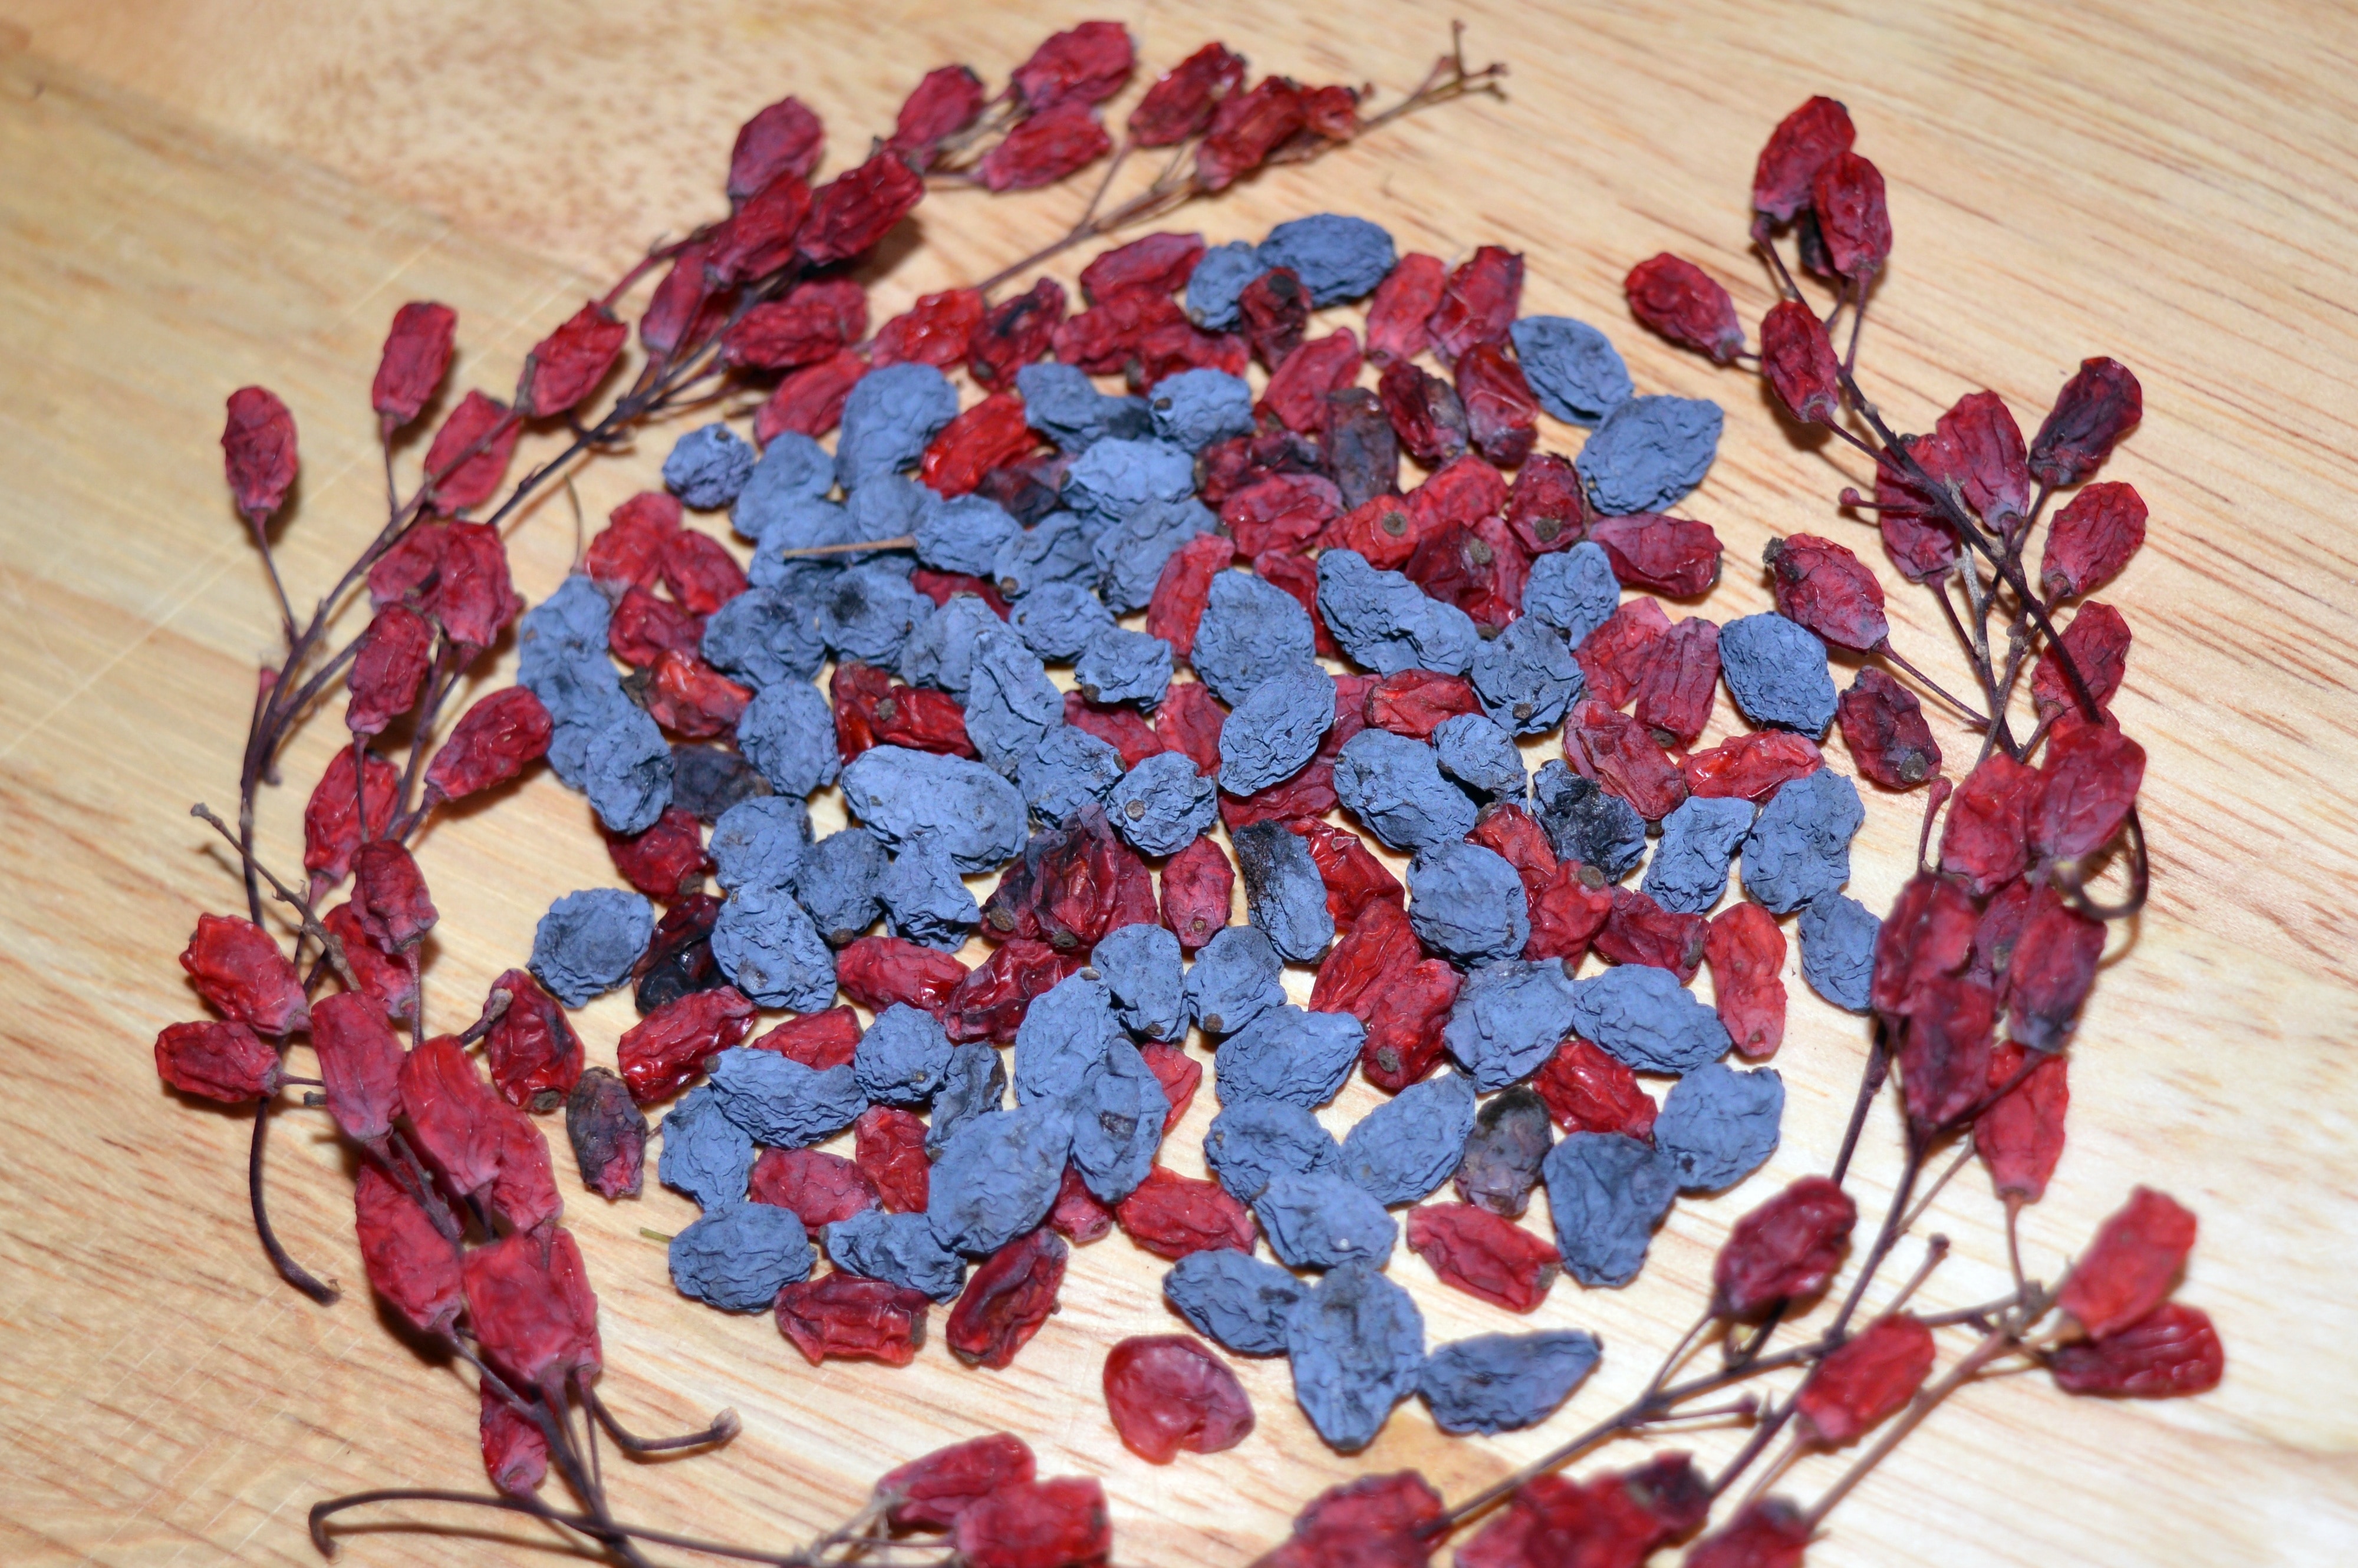 blue and red dry fruits